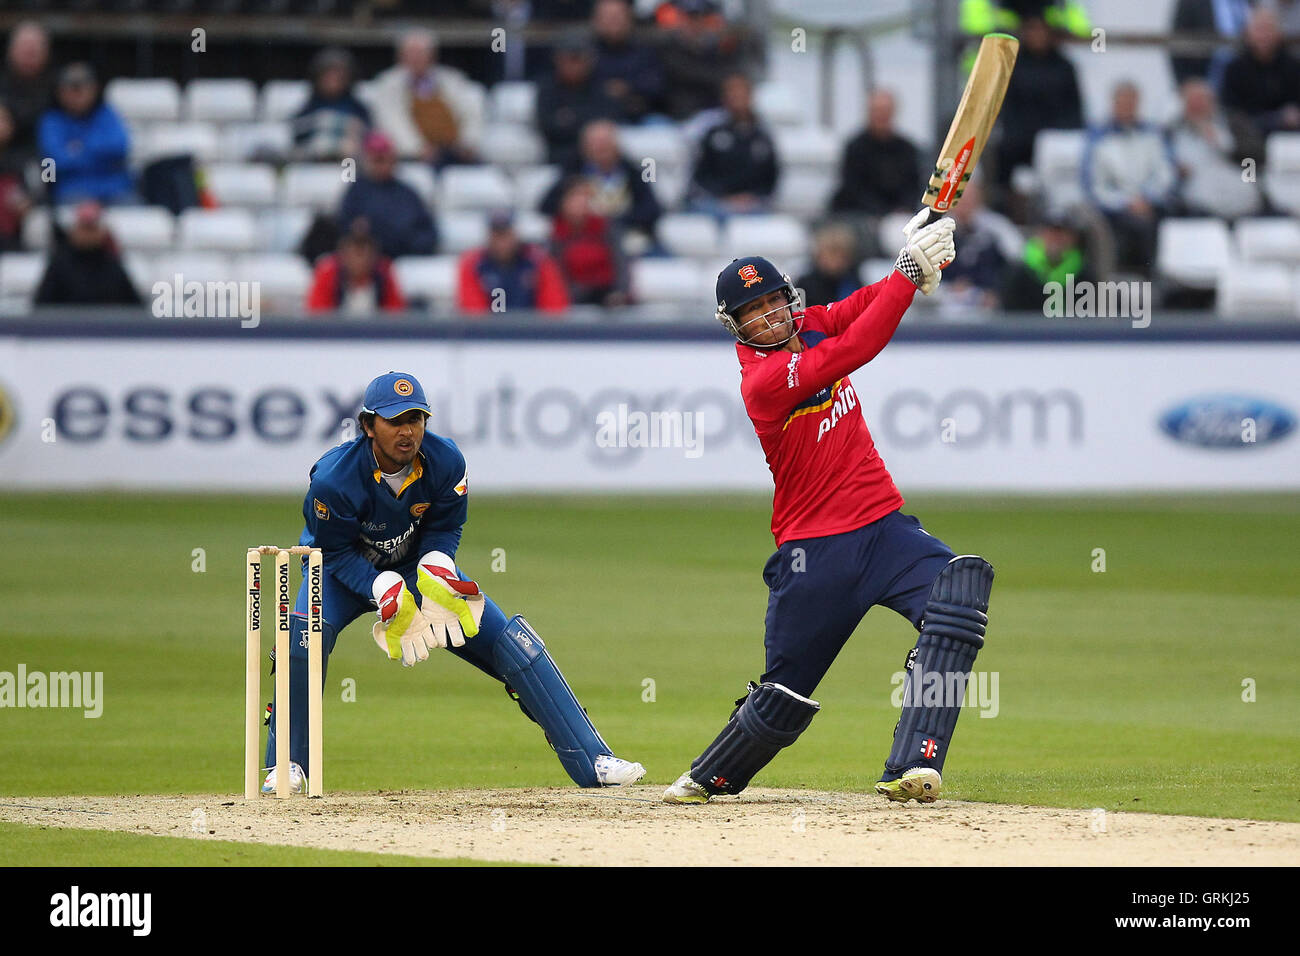 Ben Foakes of Essex hits out as Dinesh Chandimal of Sri Lanka looks on - Essex Eagles vs Sri Lanka - 50-over Tour Match at the Essex County Ground, Chelmsford - 13/05/14 Stock Photo